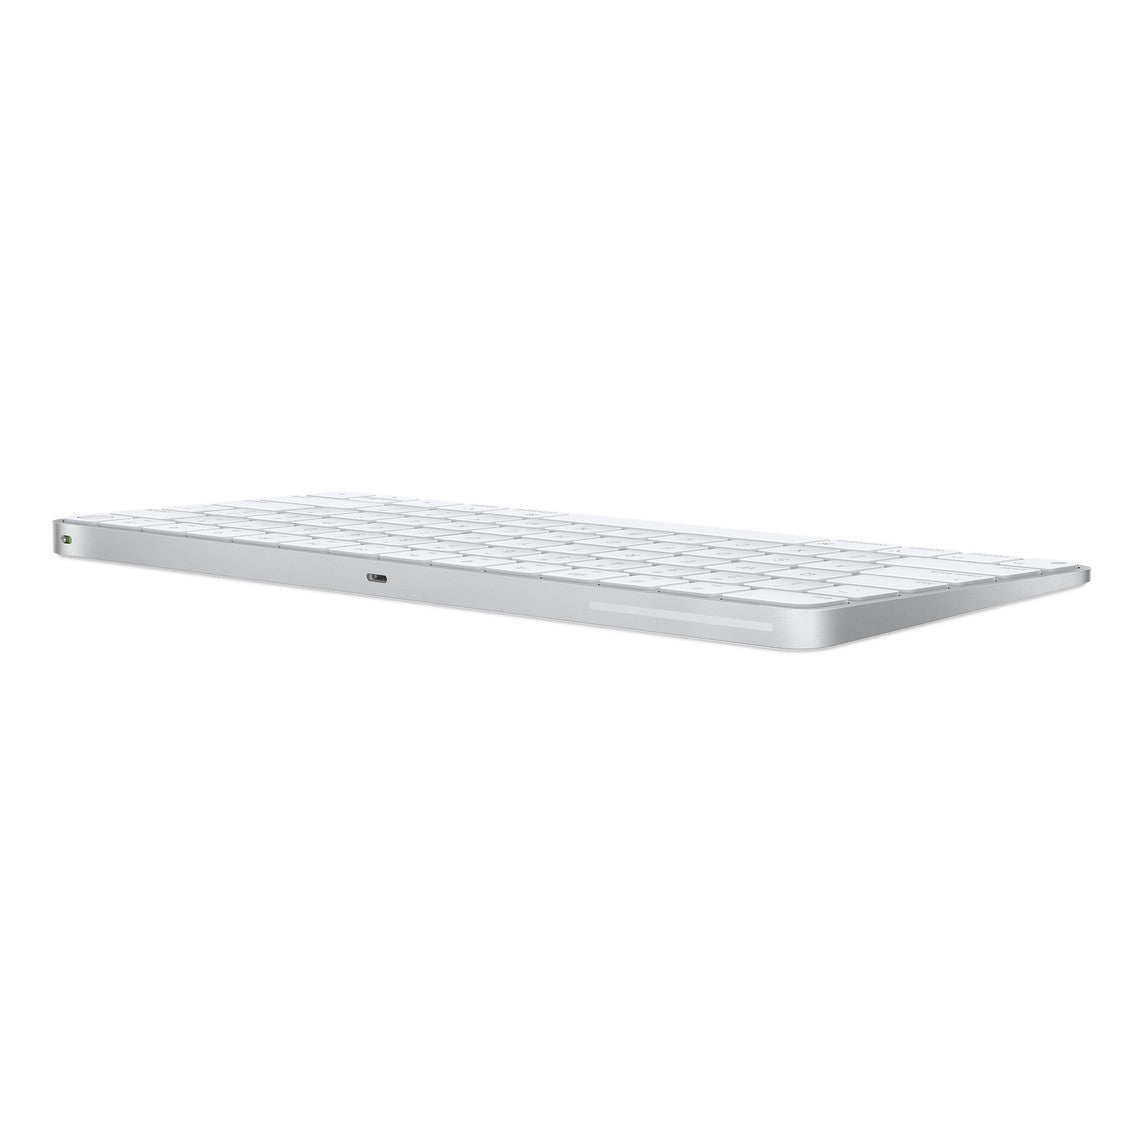 MK293AB/A/APPLE Magic Keyboard with Touch ID for Mac computers with Apple silicon - Arabic White / Device / -